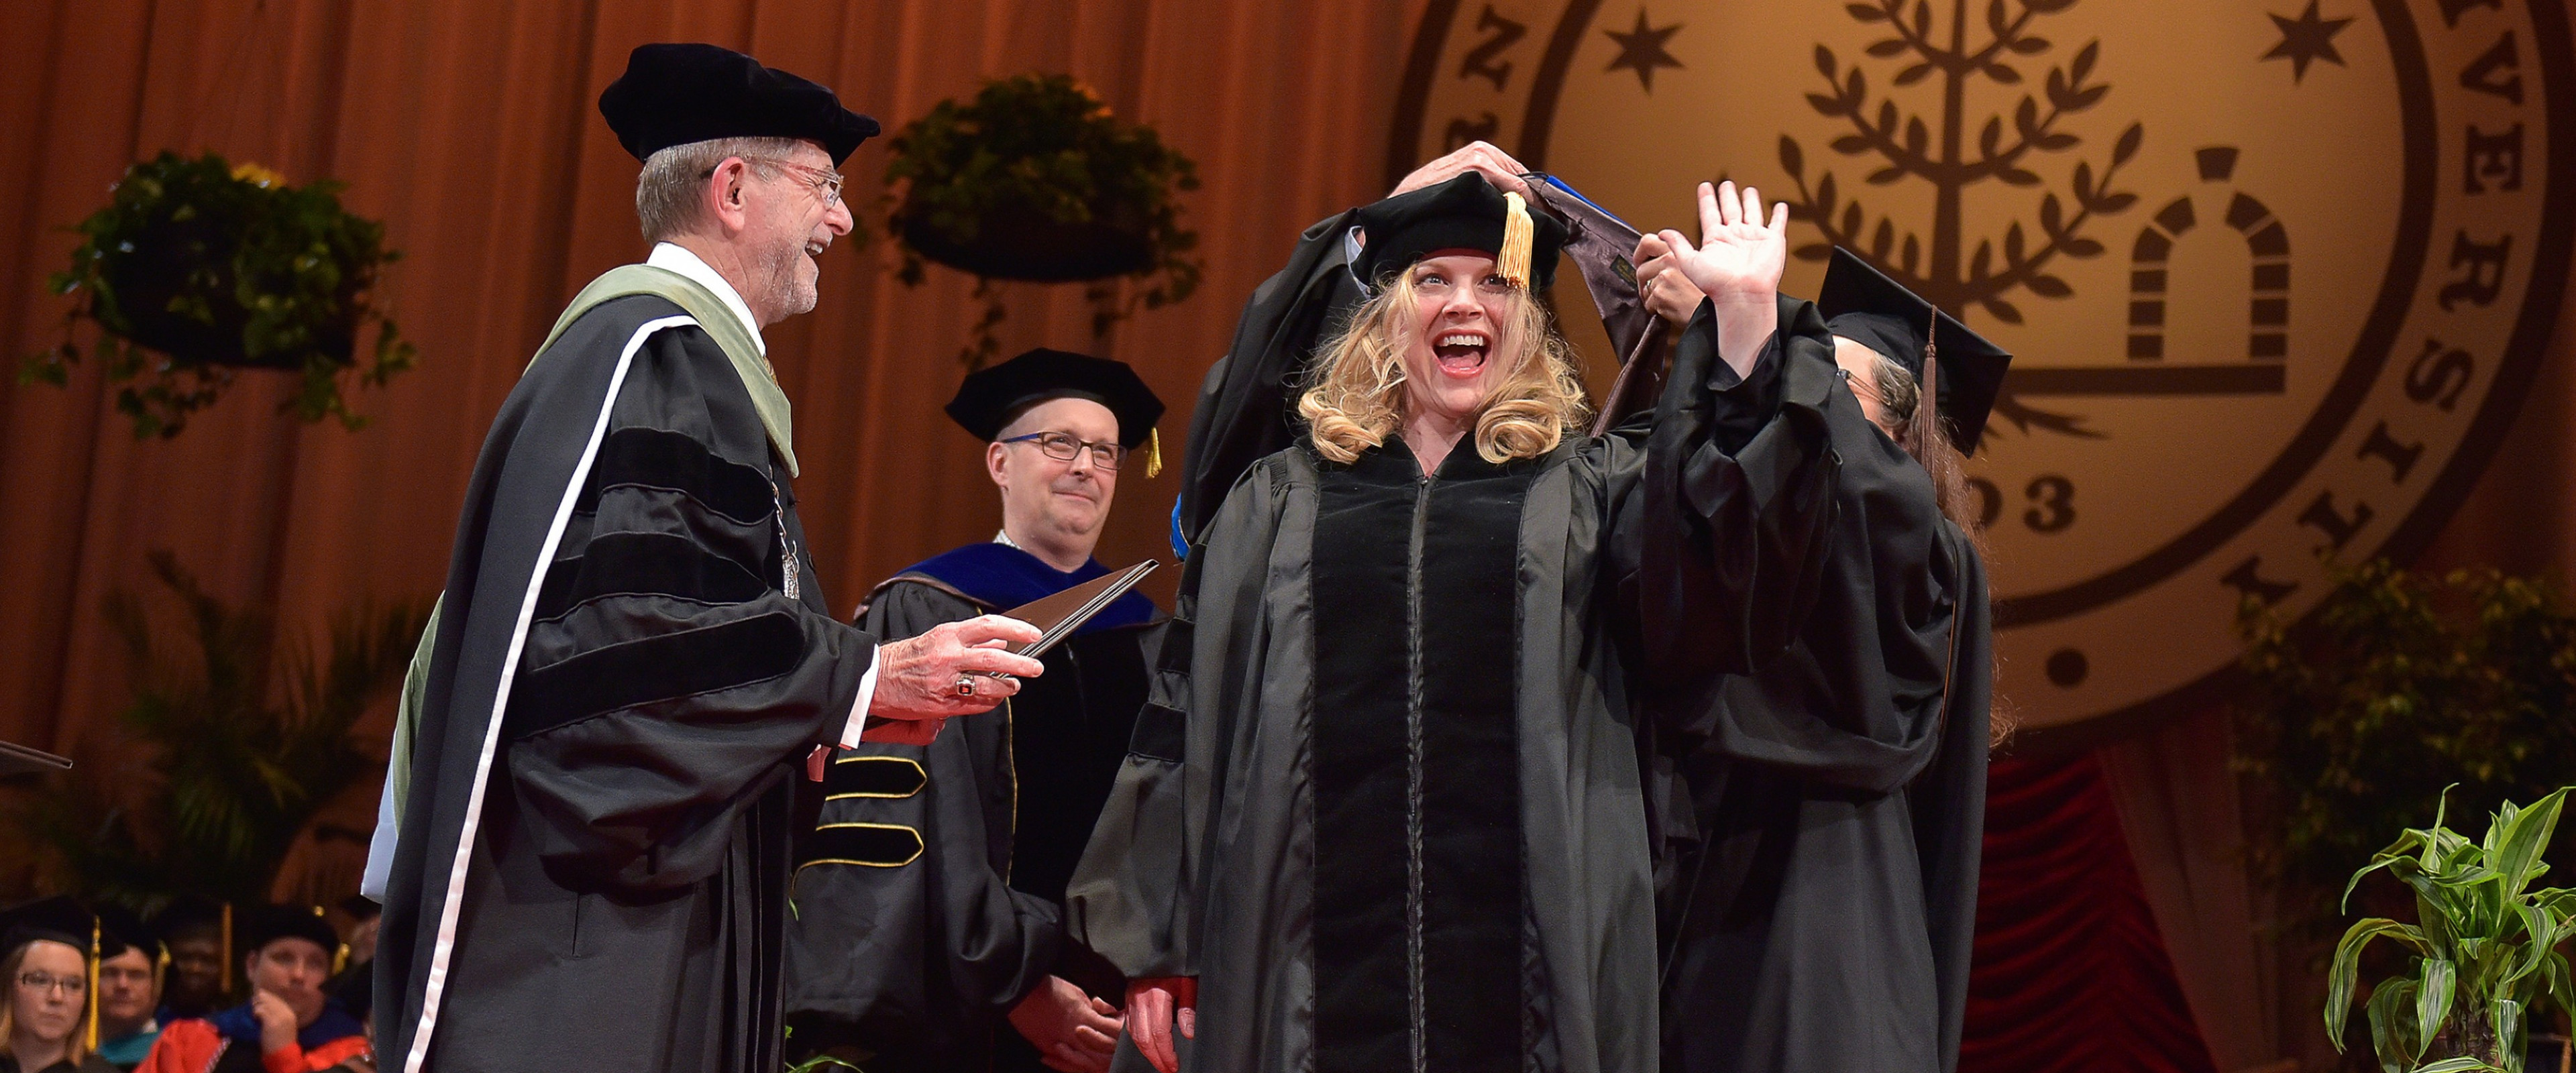 Aimee Valentine waves as she receives a Doctor of Philosophy in English